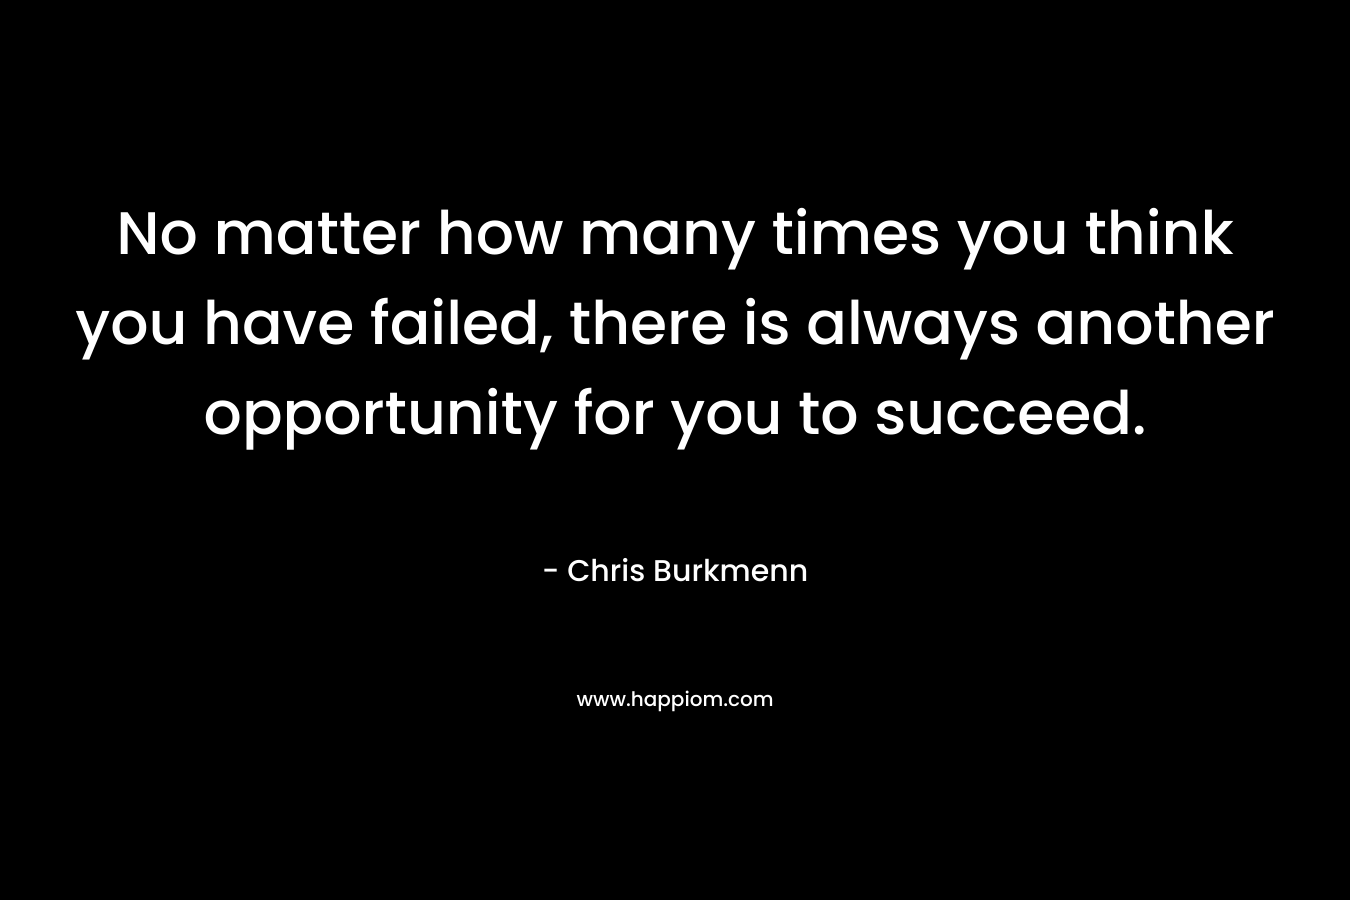 No matter how many times you think you have failed, there is always another opportunity for you to succeed. – Chris Burkmenn